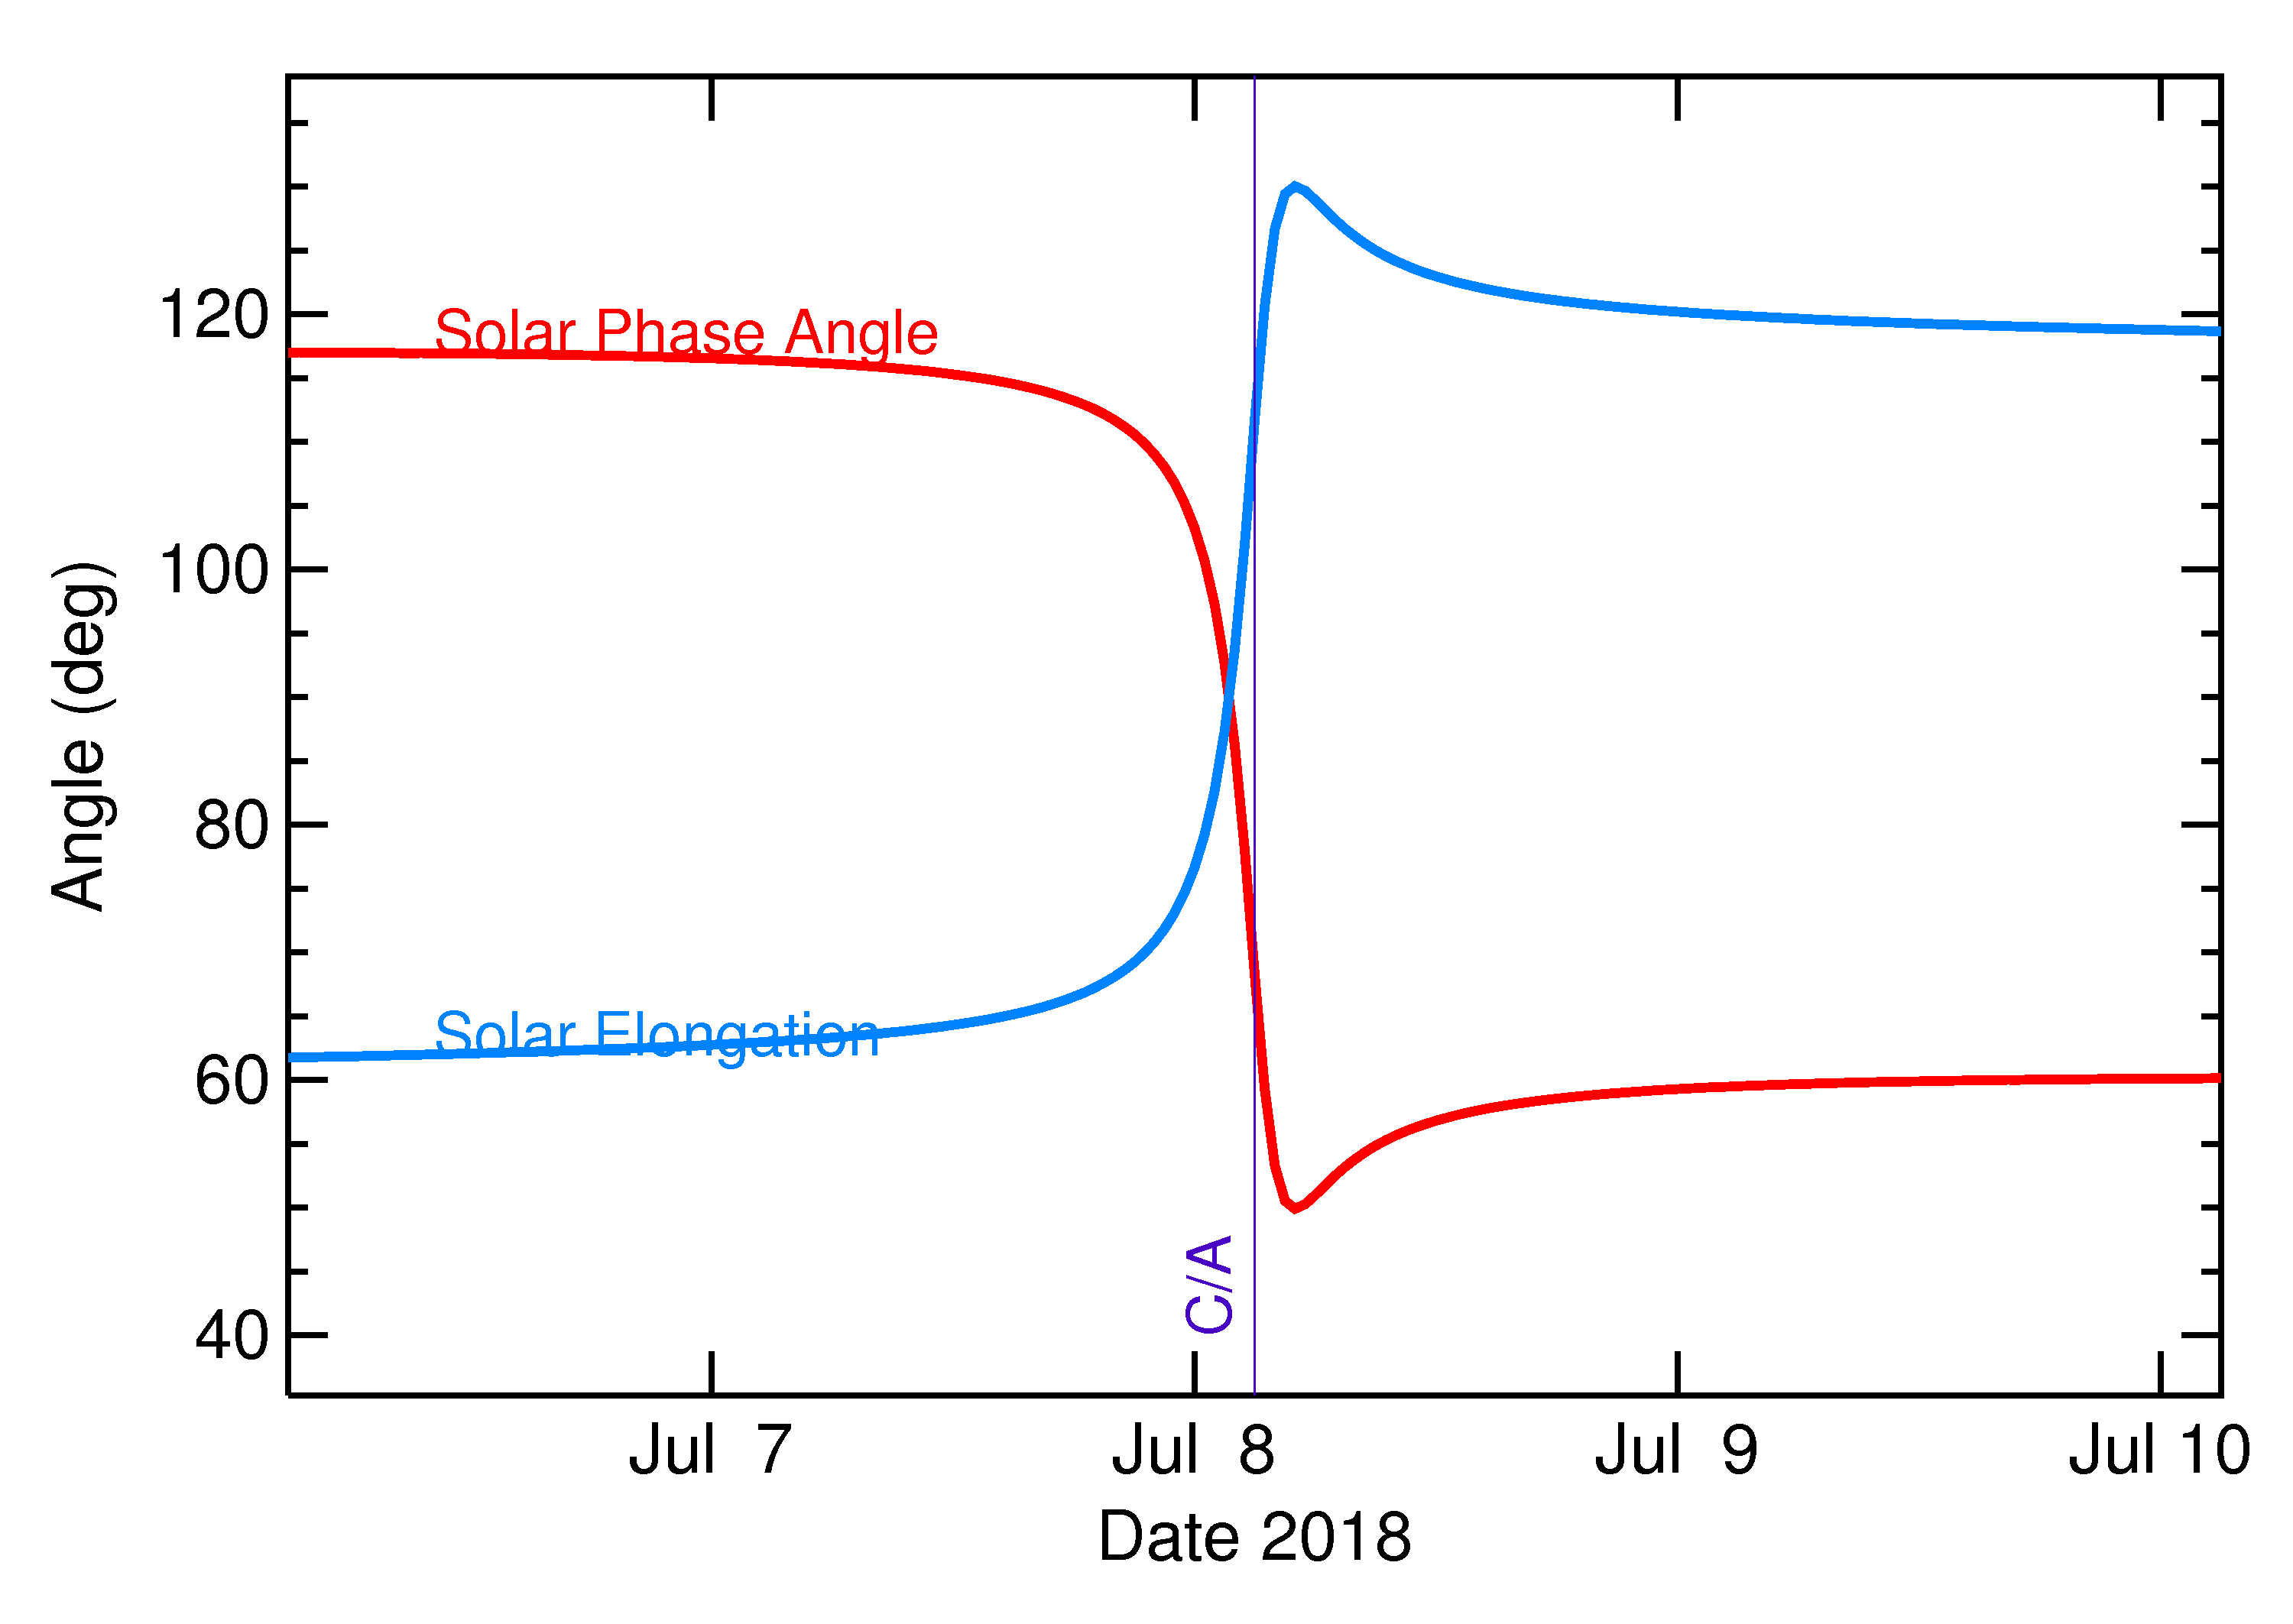 Solar Elongation and Solar Phase Angle of 2018 NW in the days around closest approach